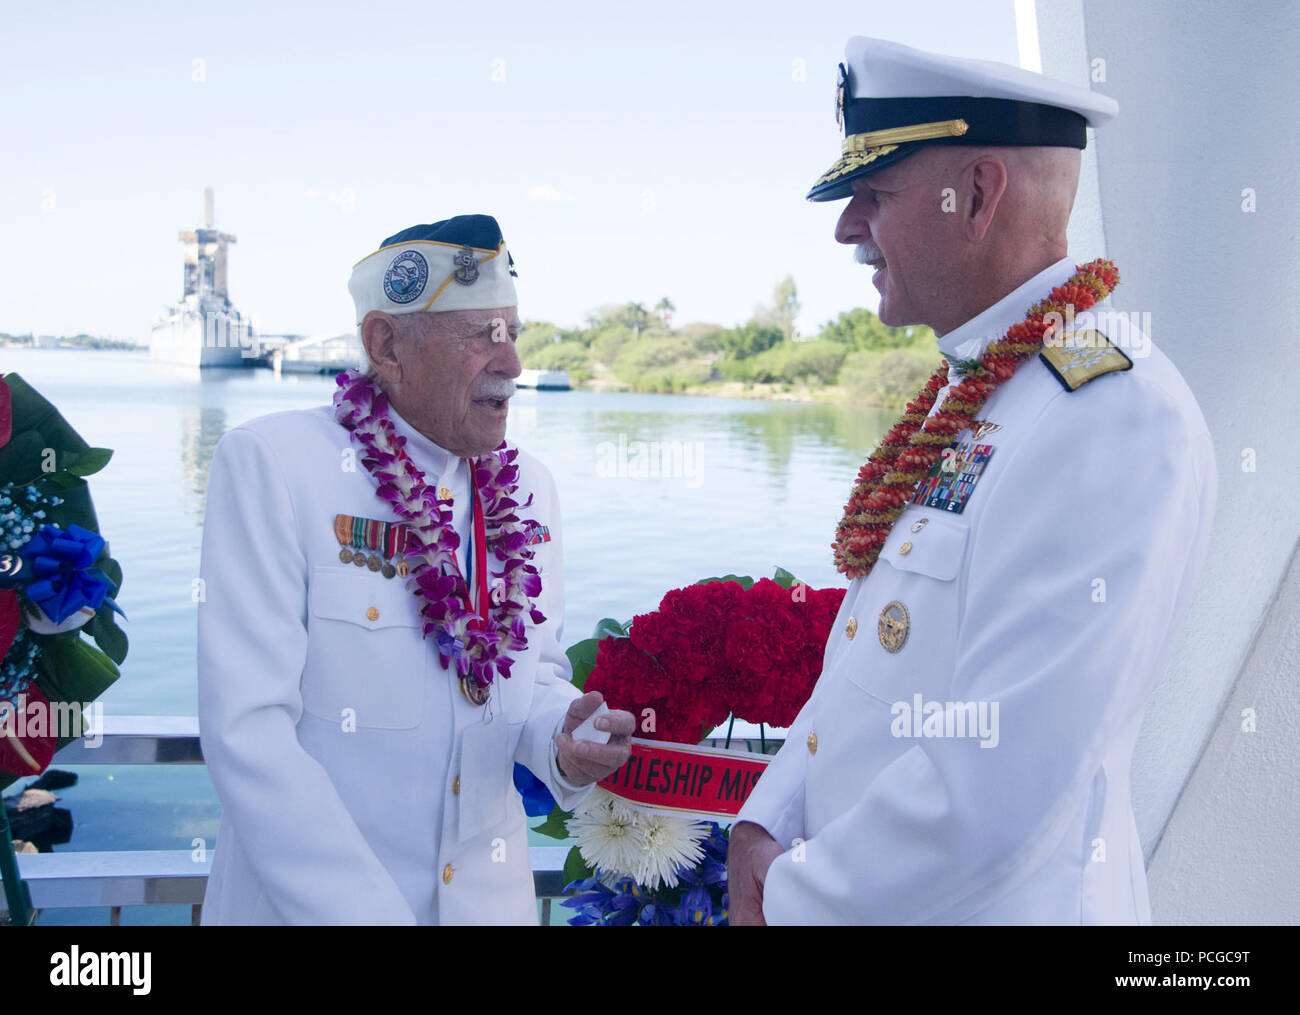 PEARL HARBOR (Dec. 7, 2017) Adm. Scott Swift, commander, U.S. Pacific Fleet, right, and Pearl Harbor survivor Delton 'Wally' Walling, left,  talk following the conclusion of the floral tribute aboard the USS Arizona Memorial during the 76th Anniversary of the attacks on Pearl Harbor and Oahu at Joint Base Pearl Harbor-Hickam. The 76th commemoration, co-hosted by the U.S. Military, the National Park Service and the State of Hawaii, provided veterans, family members, service members and the community a chance to honor the sacrifices made by those who were present Dec. 7, 1941, as well as through Stock Photo